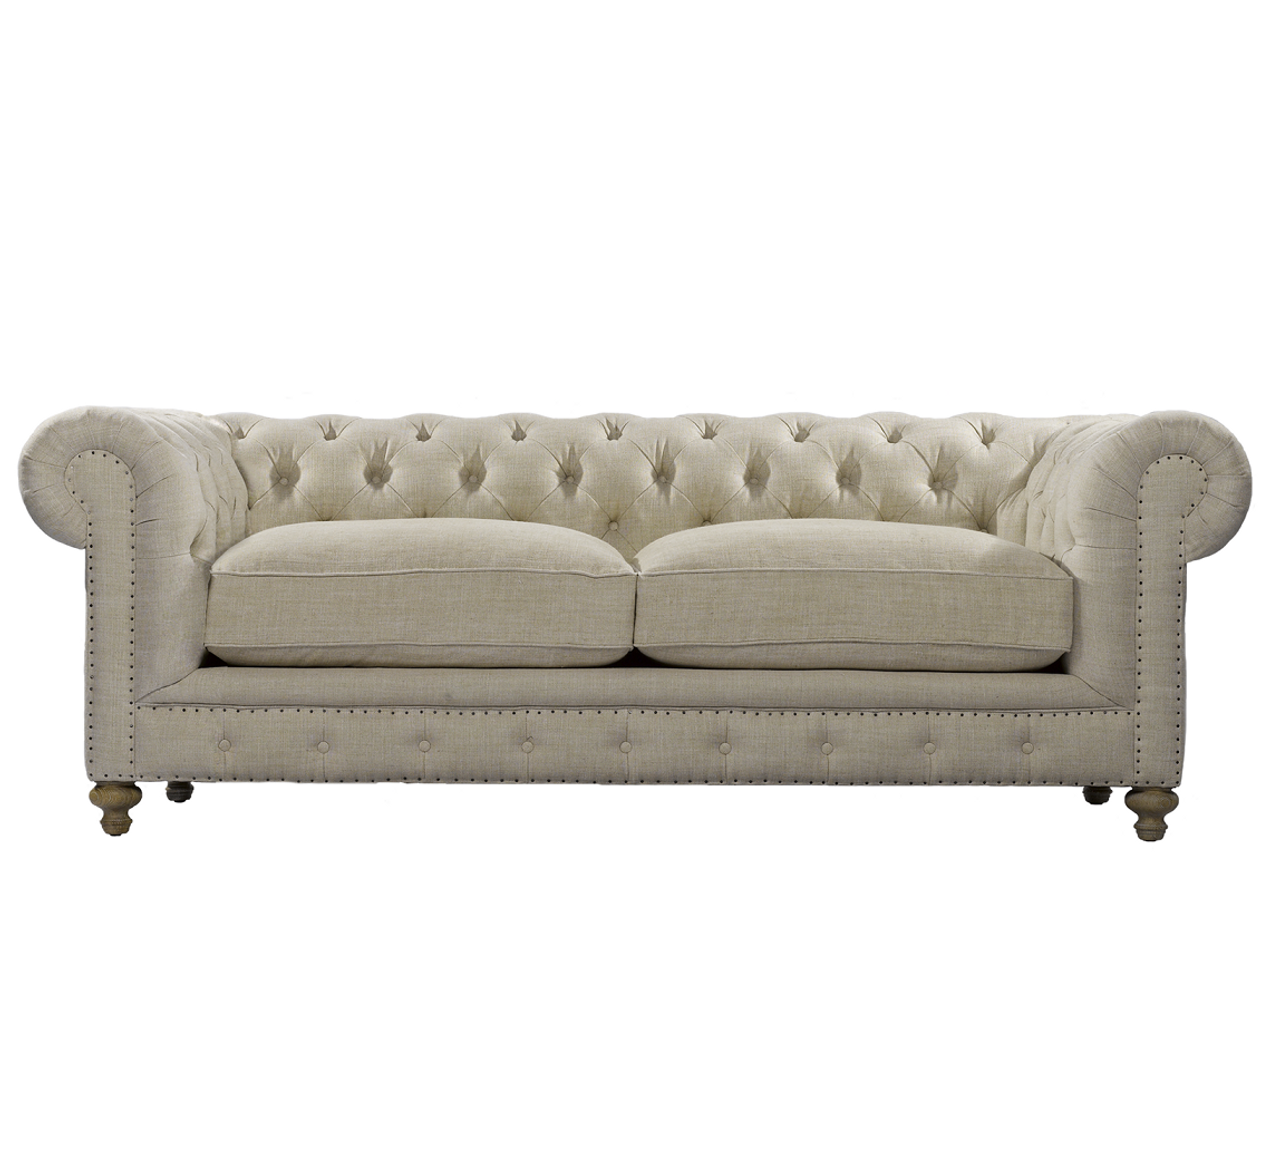 Cigar Club 90 Linen Upholstered Chesterfield Tufted Sofas Zin Home